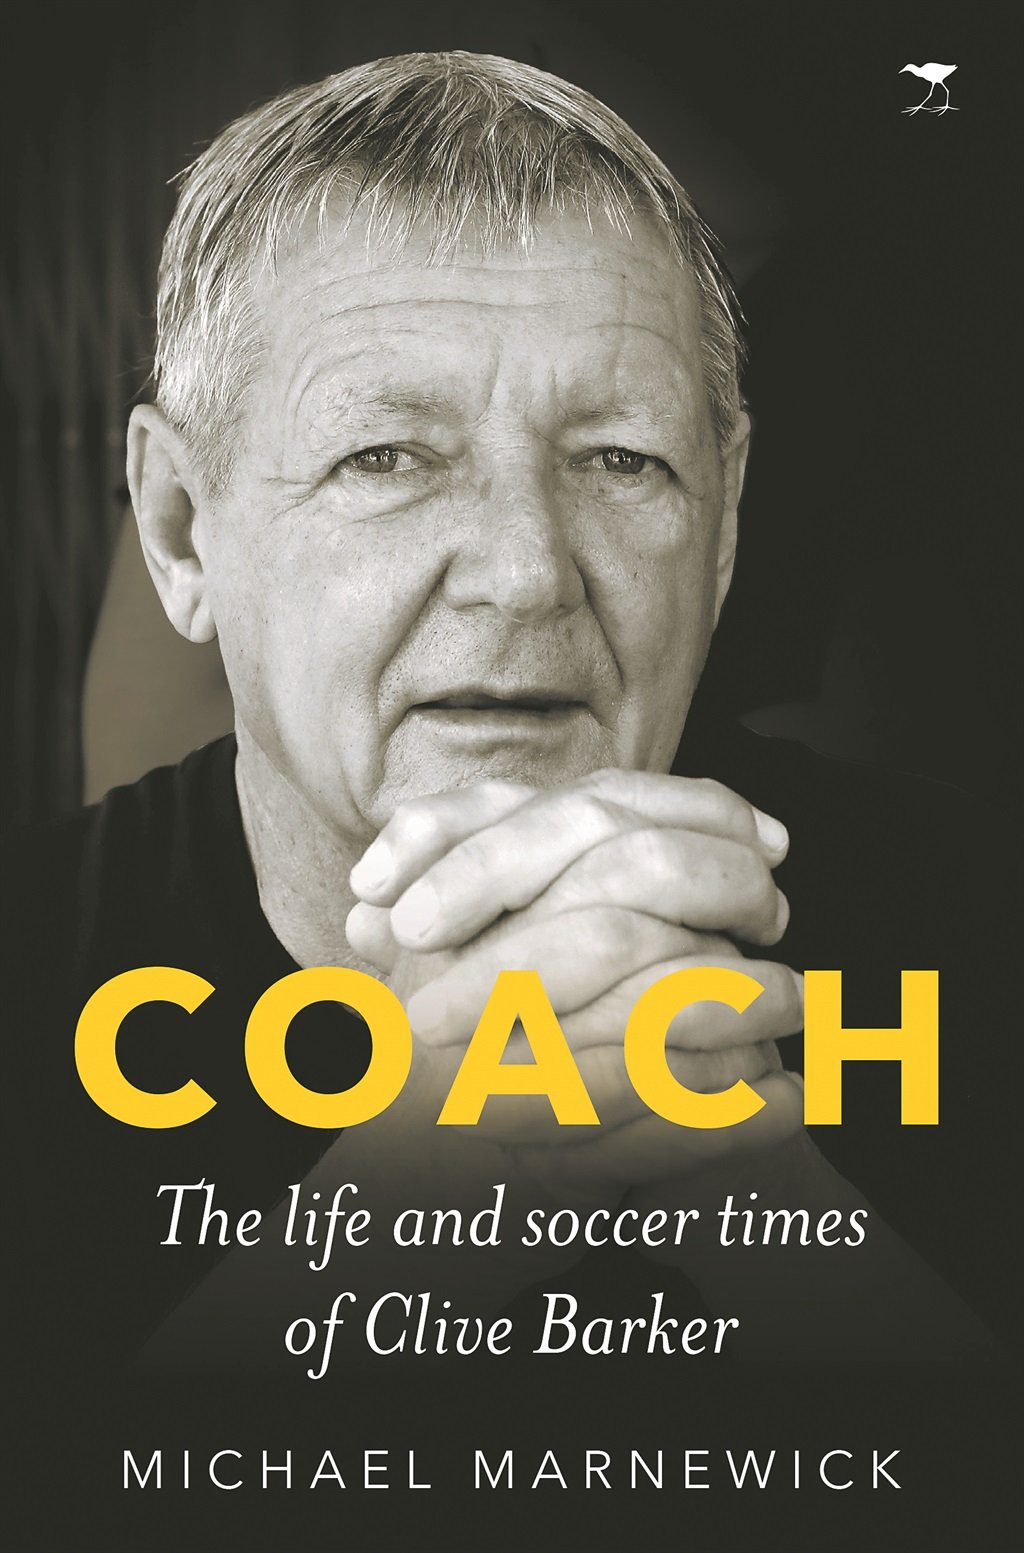 Coach: The life and soccer times of Clive Barker by Michael Marnewick